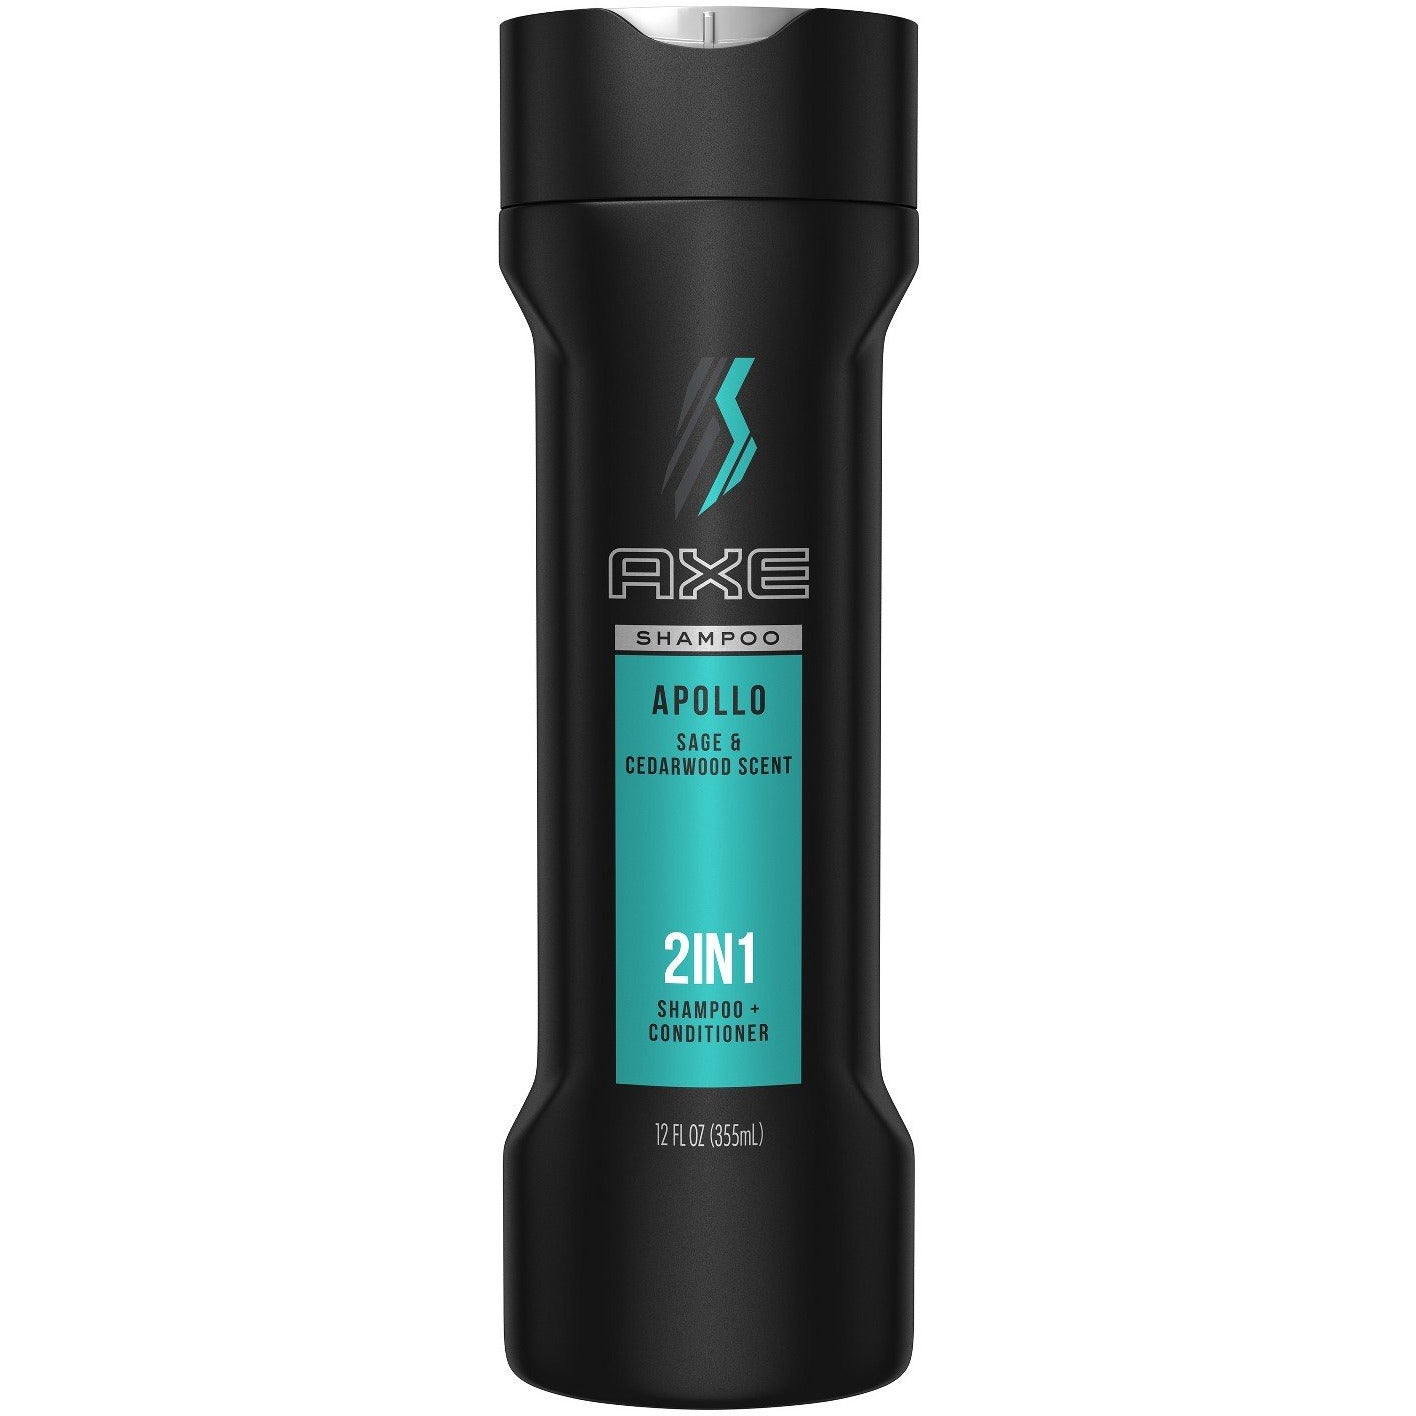 Axe Hair 2 In 1 Shampoo With Conditioner, 16 Oz